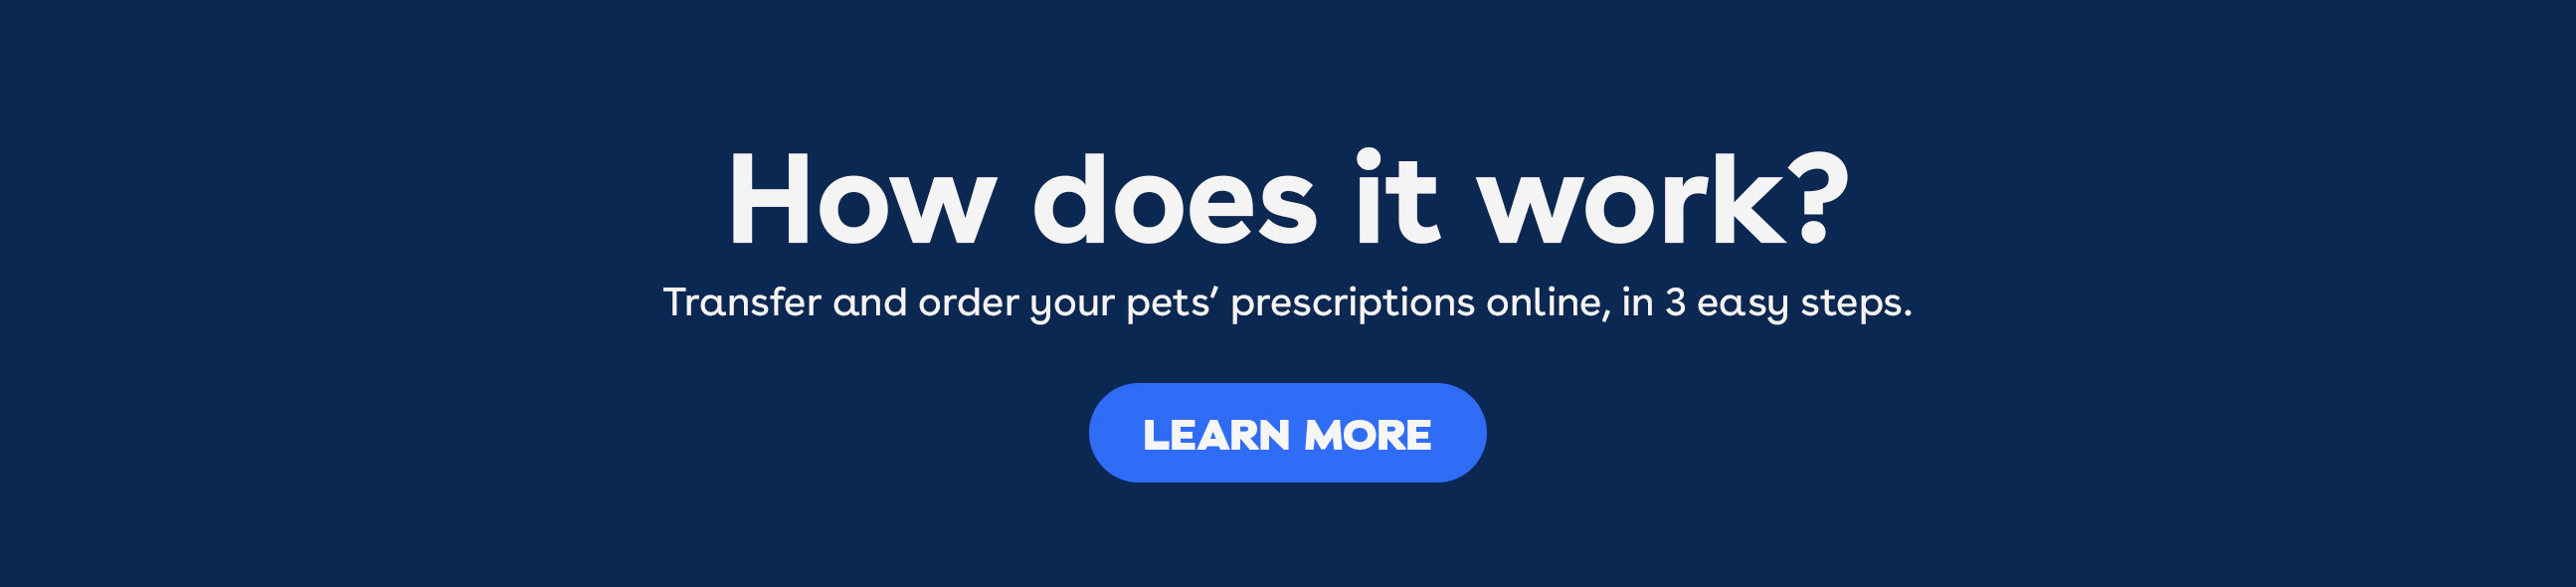 How does it work? Transfer and order your pets' prescriptions online, in 3 easy steps.